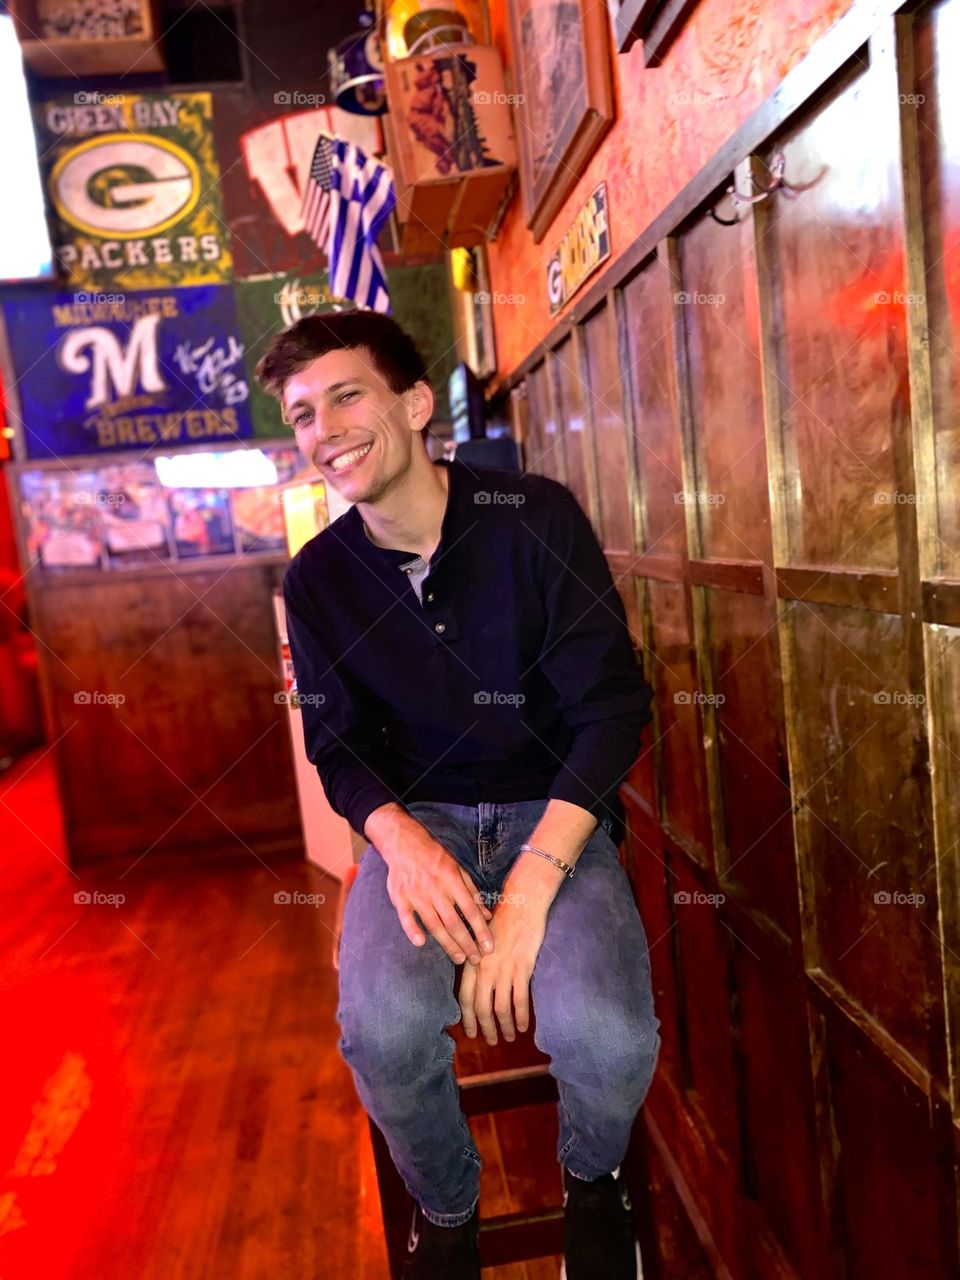 Enjoying a wholesome summer night out with the best gal friends (who insist on a photo shoot) at a dive bar in Milwaukee is the best way to lift the spirit!